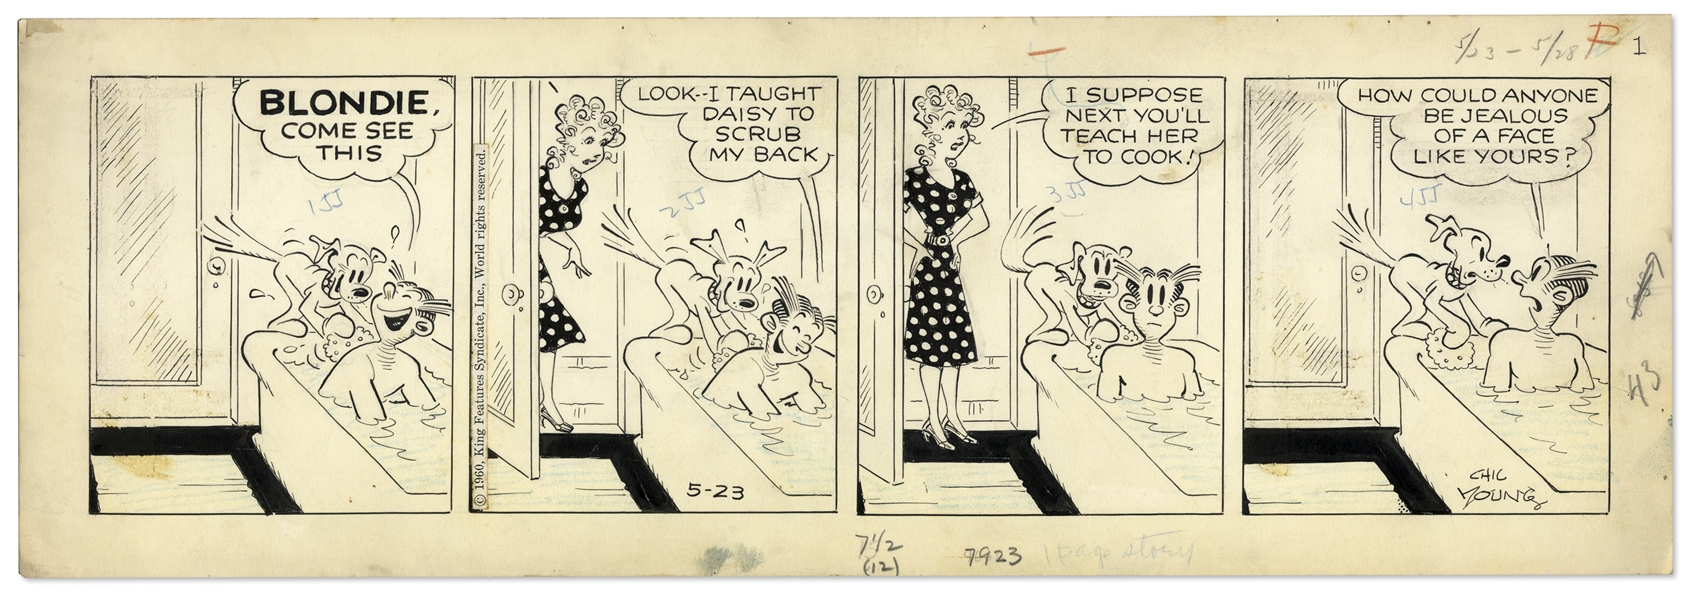 2 Chic Young Hand-Drawn ''Blondie'' Comic Strips From 1960 -- With Chic Young's Original Preliminary Artwork for Both